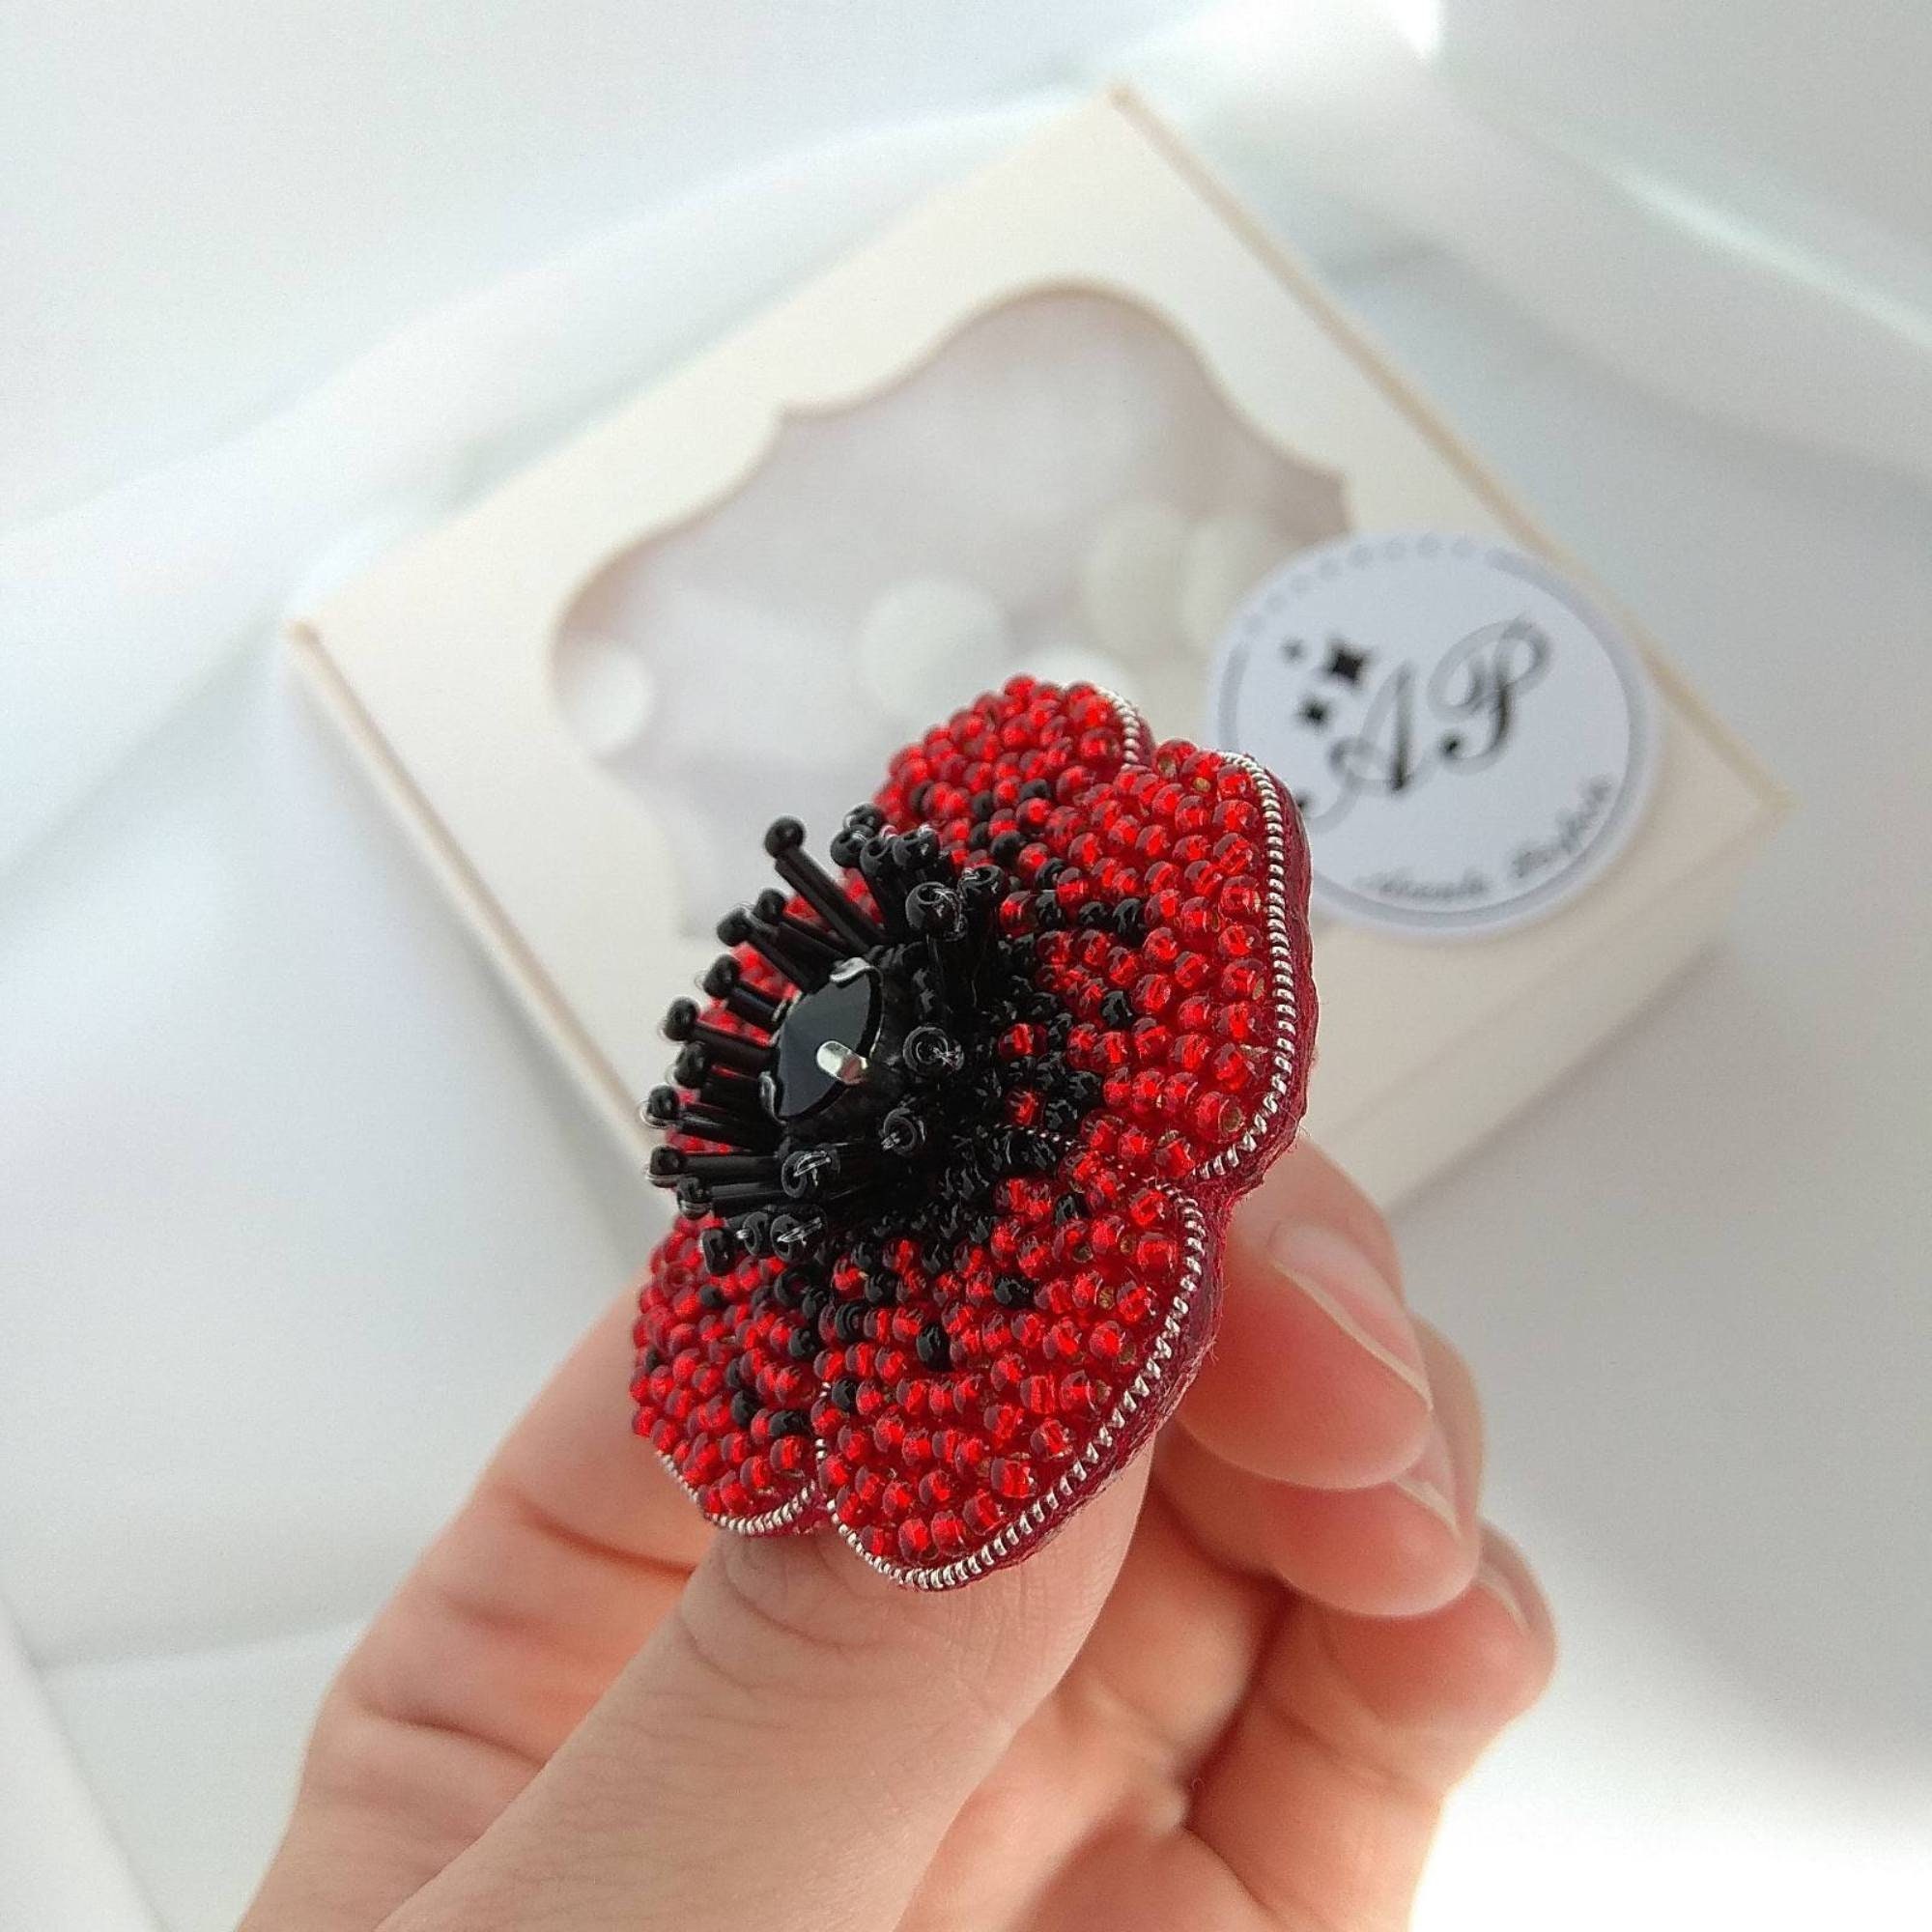 Exquisite Rhinestone Poppy Red Flower Brooch For Women Aesthetic Sculpture  Clothes Accessory For Valentines Day From Seaunderty, $11.48